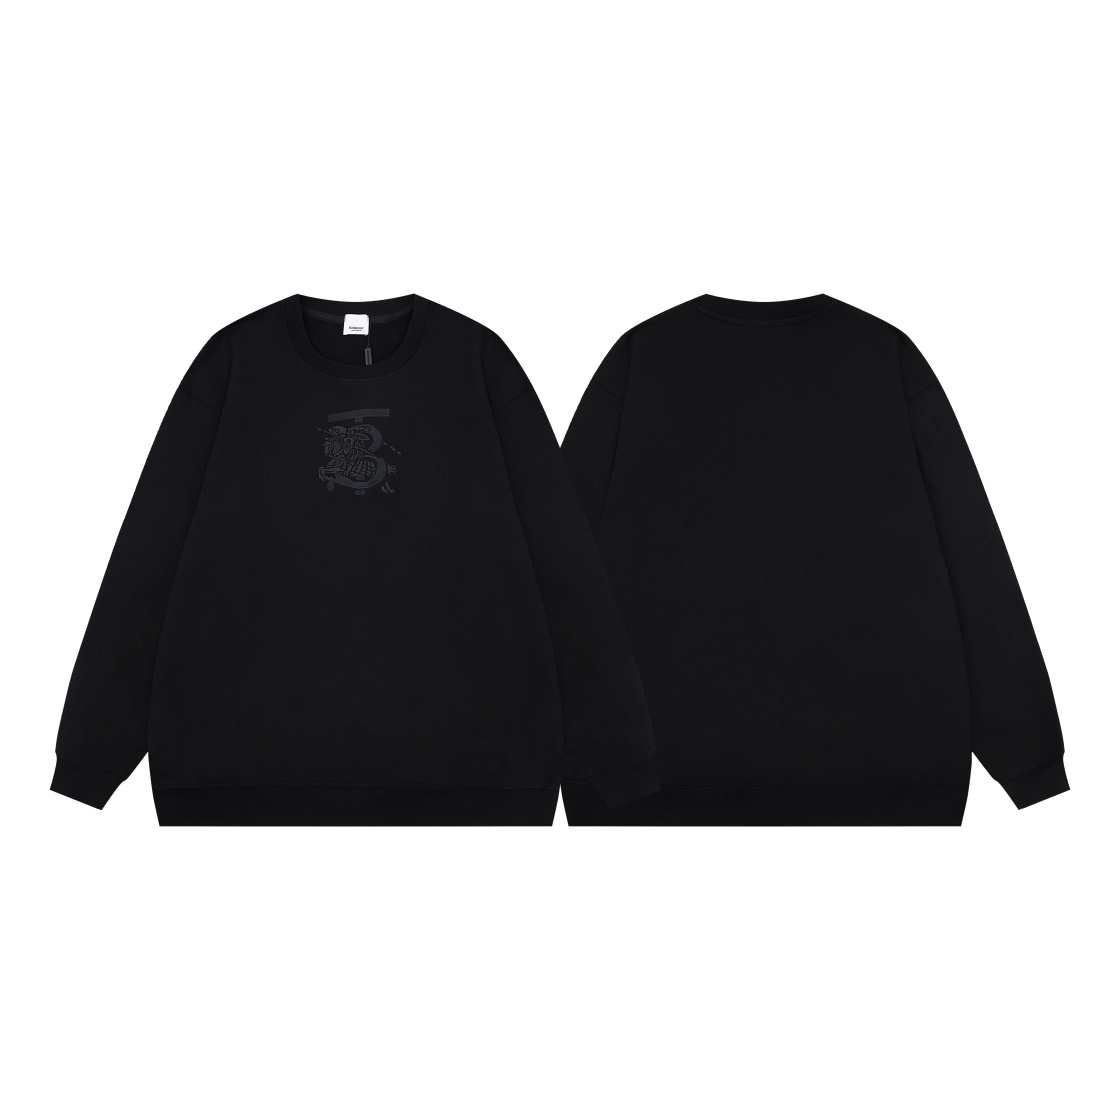 Burberry Clothing Sweatshirts Black Embroidery Fall Collection